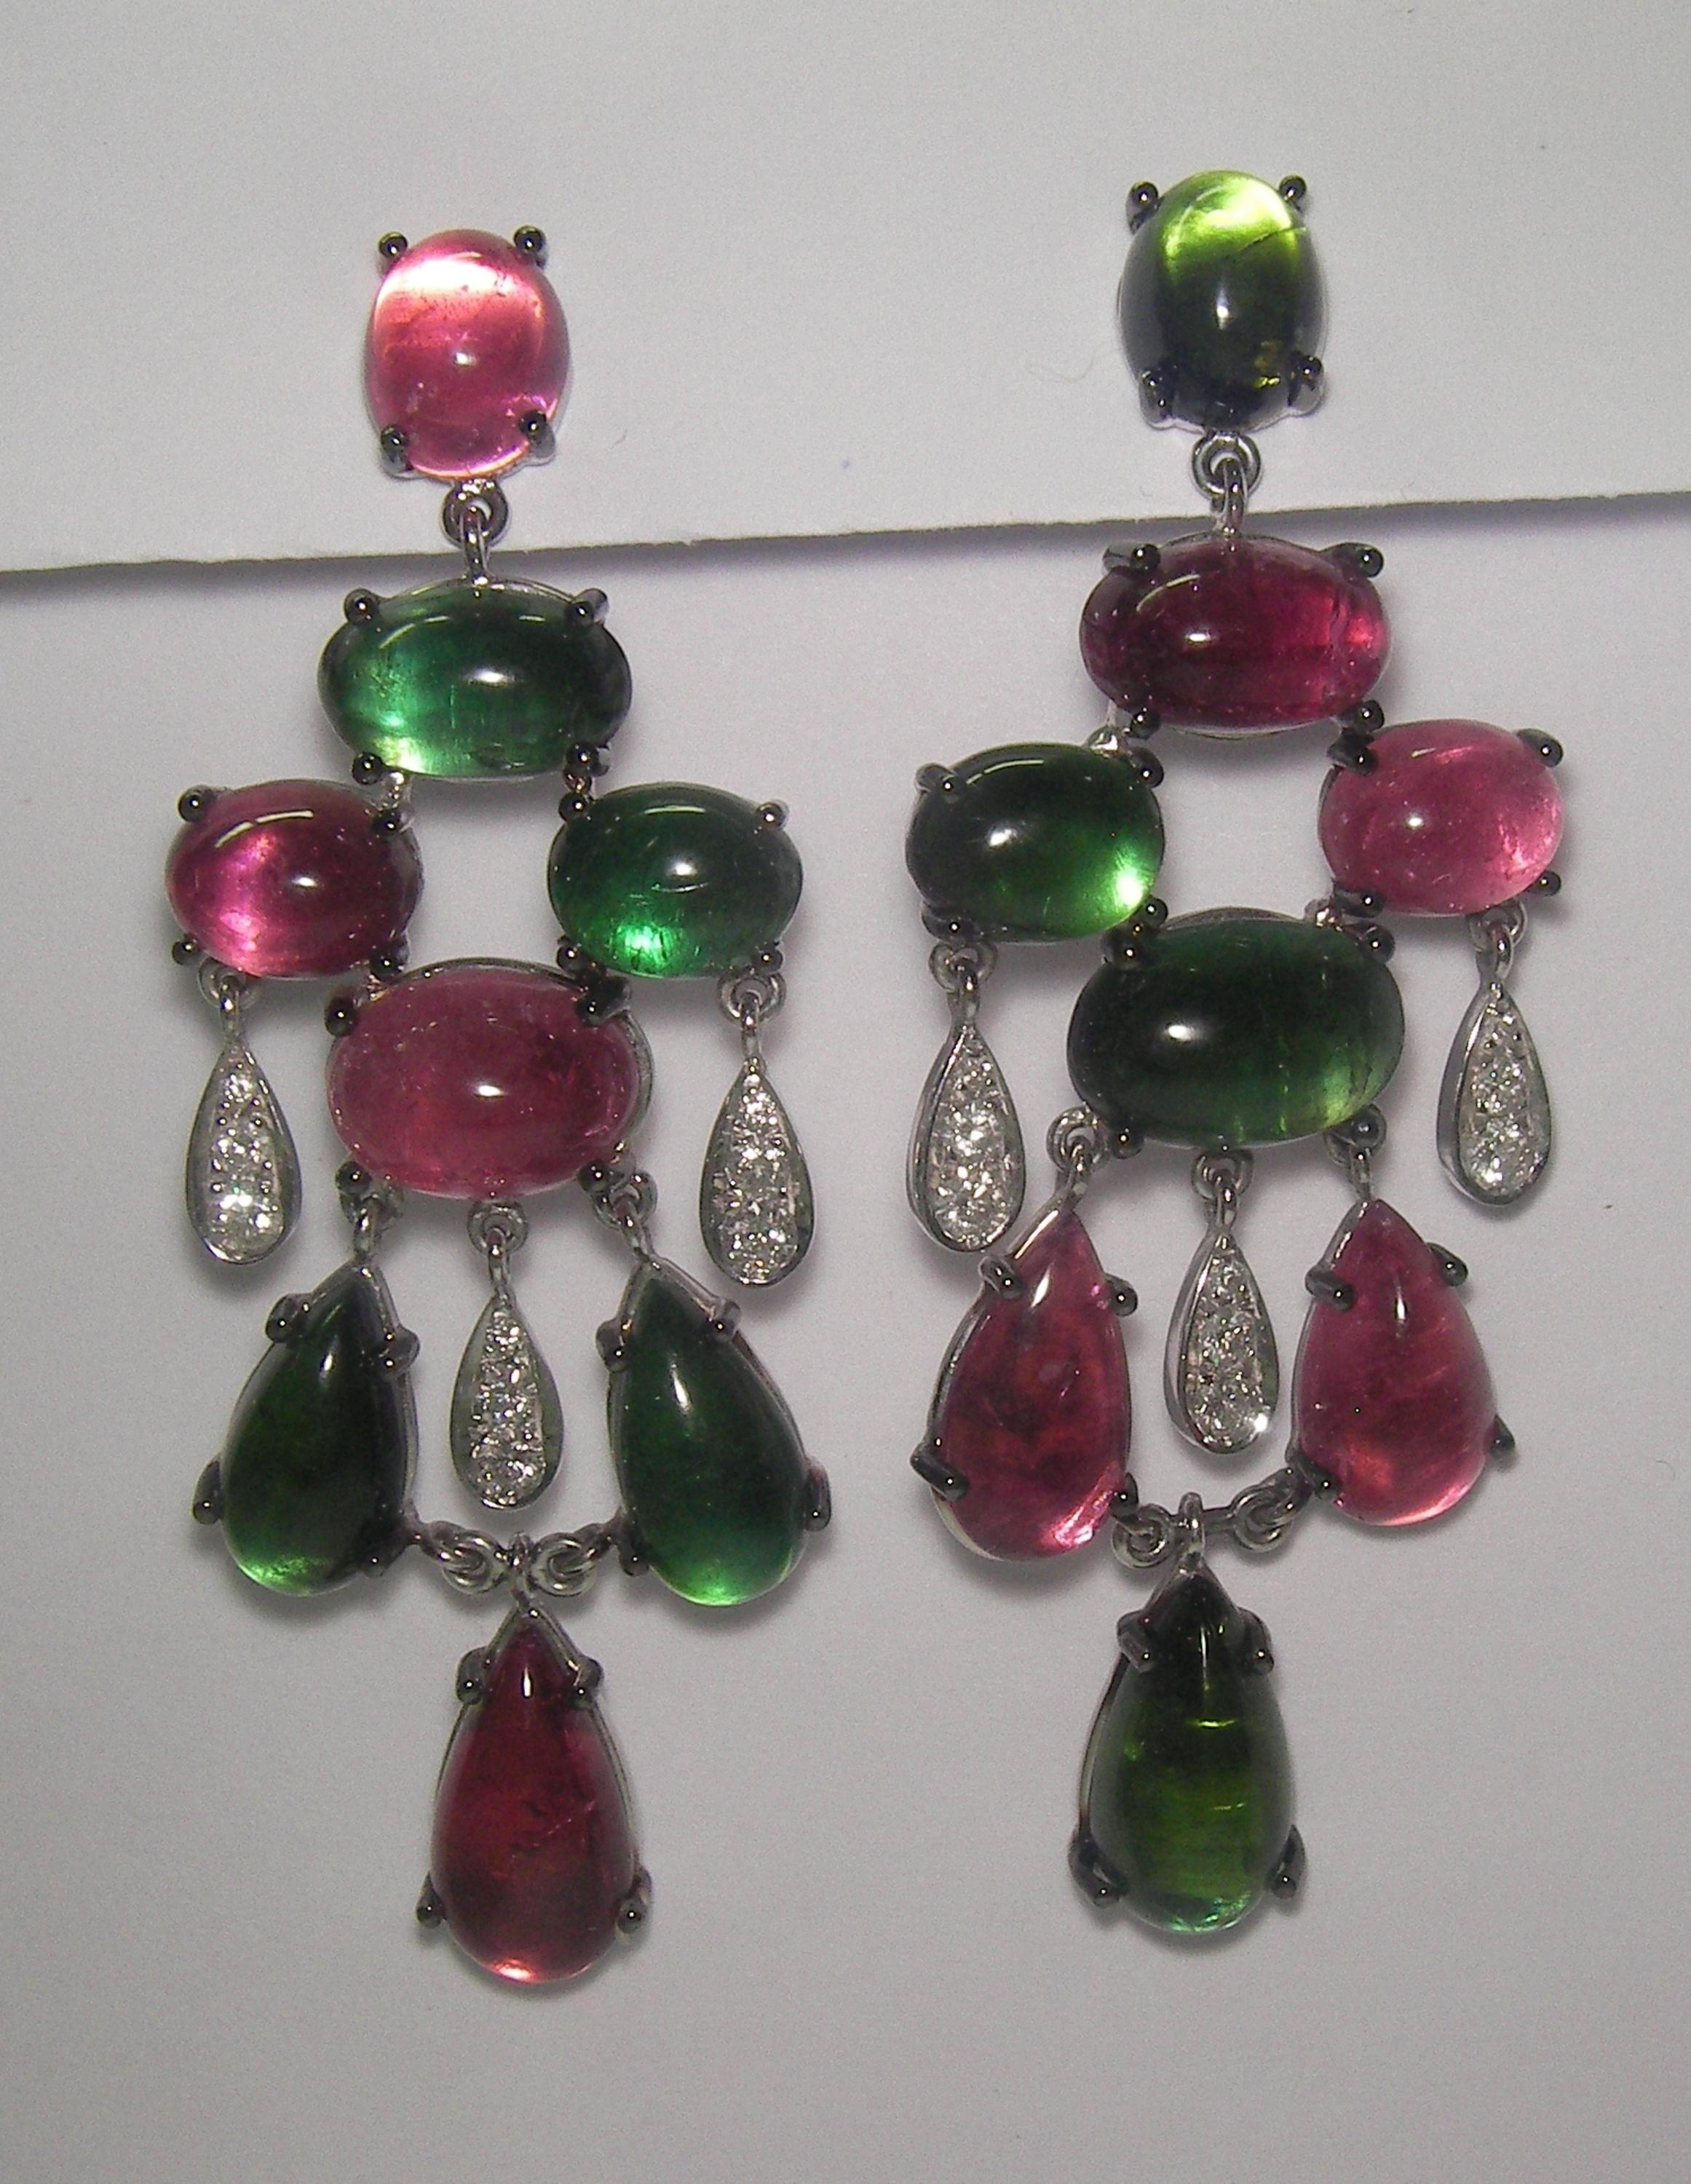 18 Karat White Gold Diamond  and Tourmaline  Dangle Earrings

18 Diamonds 0,71 Carat
16 Tourmaline  rose and green 49,45 Carat






Founded in 1974, Gianni Lazzaro is a family-owned jewelery company based out of Düsseldorf, Germany.
Although rooted